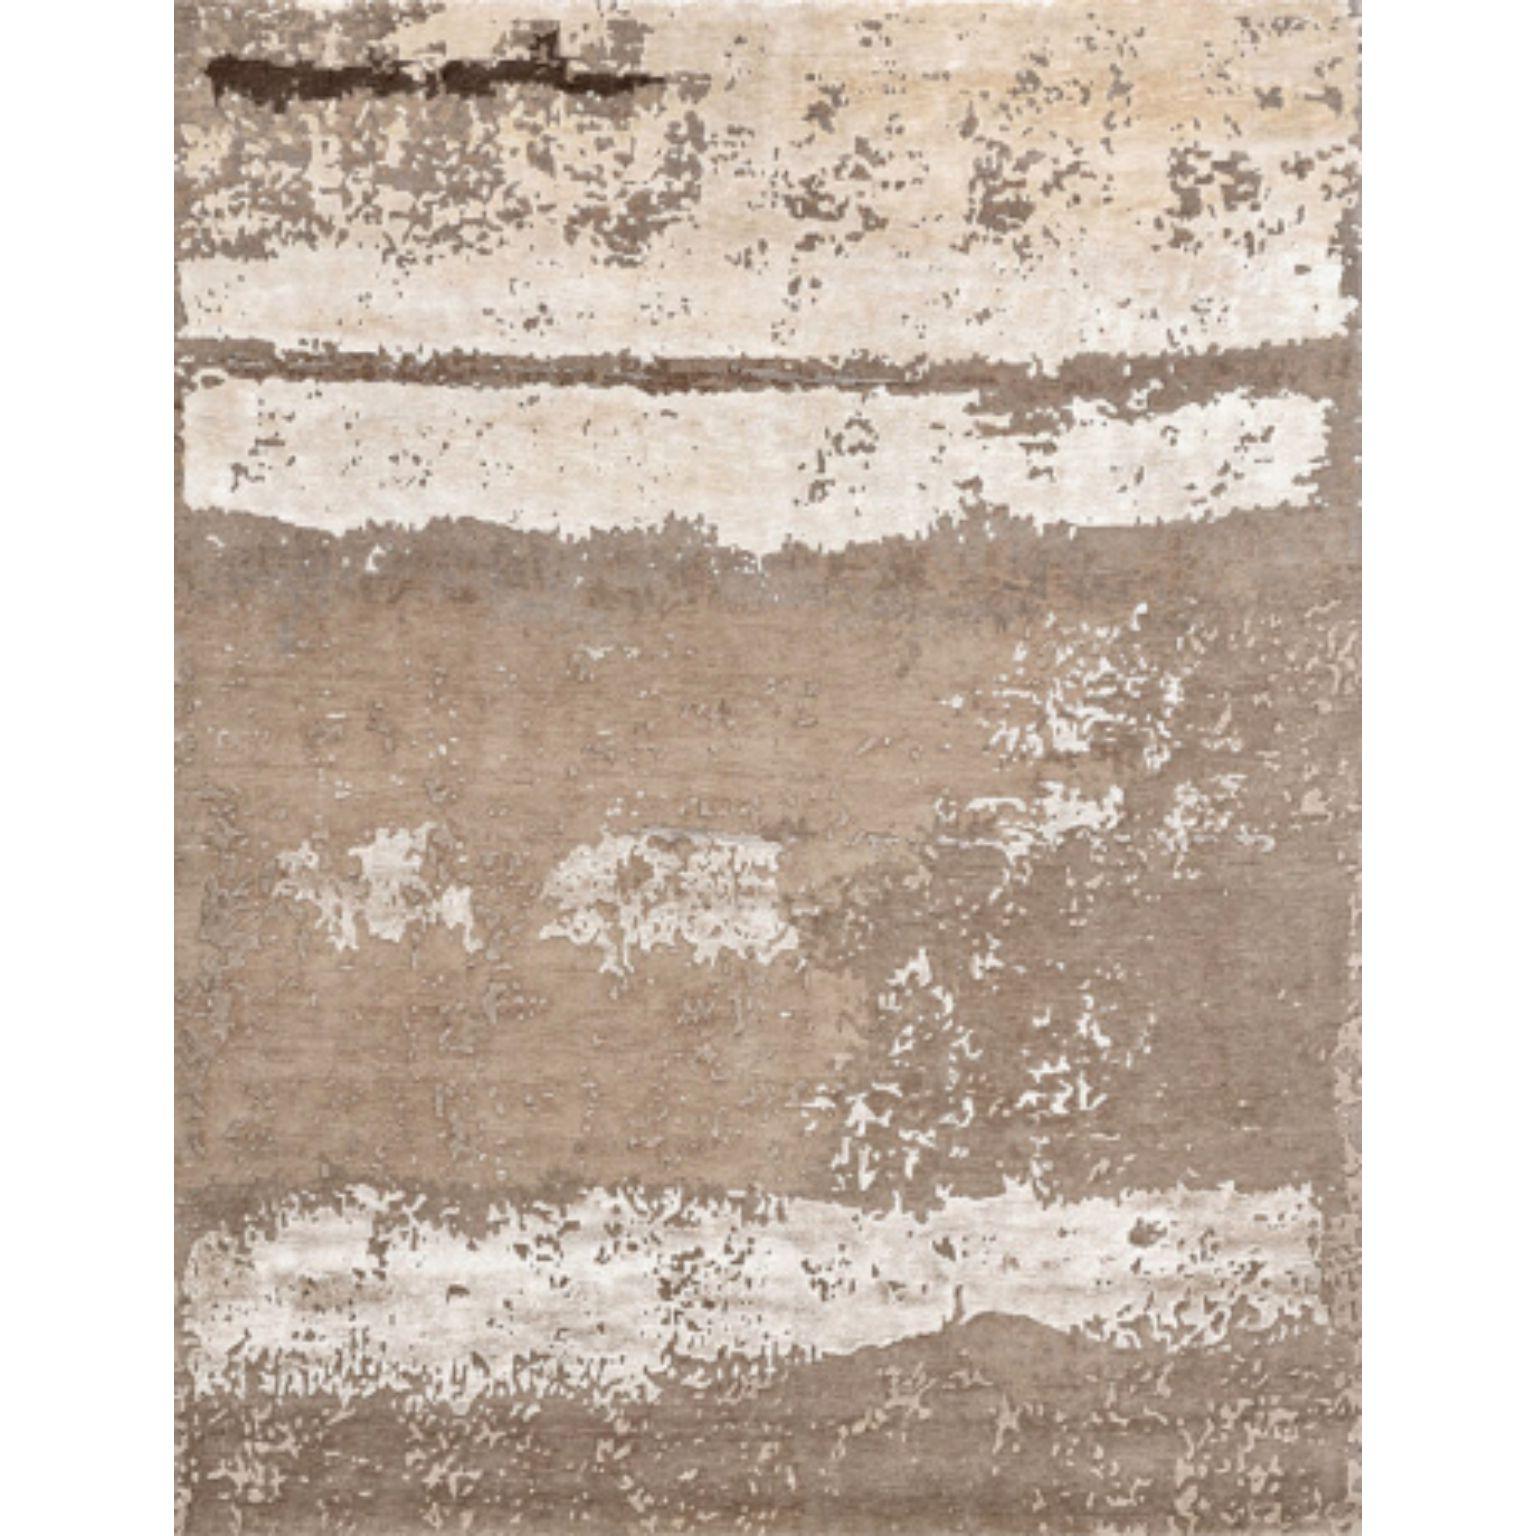 NEBULA 200 rug by Illulian.
Dimensions: D300 x H200 cm 
Materials: wool 50%, silk 50%
Variations available and prices may vary according to materials and sizes. 

Illulian, historic and prestigious rug company brand, internationally renowned in